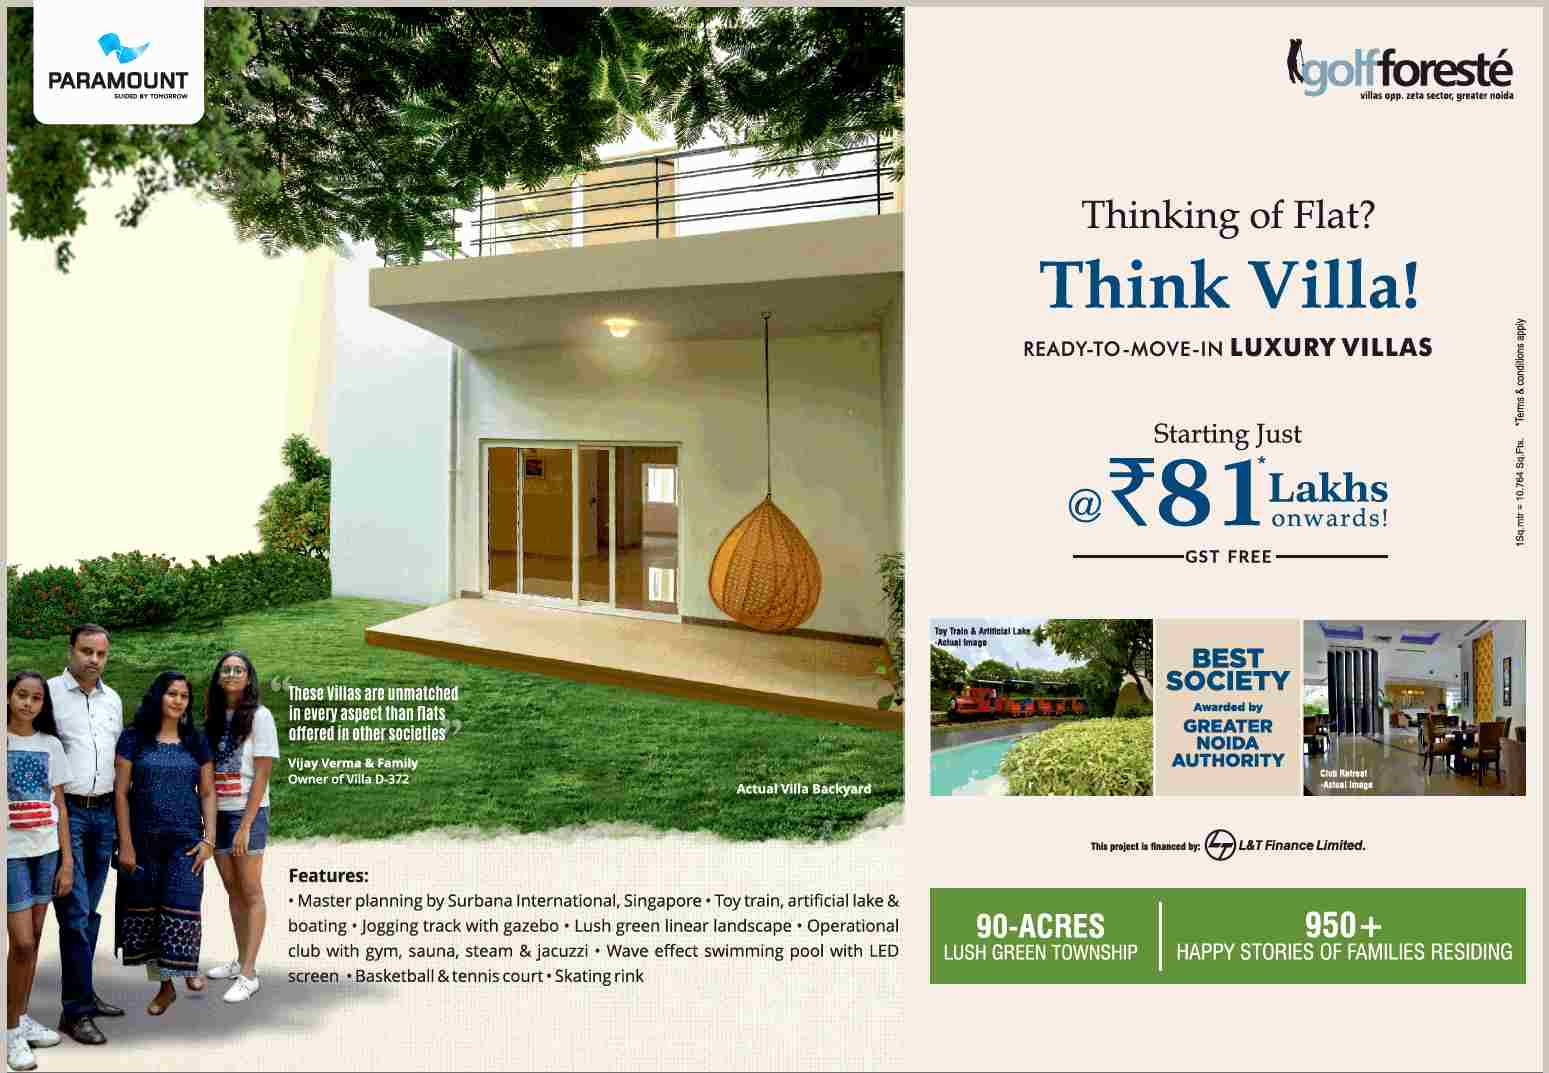 Book ready to move-in luxury villas starting at Rs. 81 Lakhs onwards at Paramount Golf Foreste in Noida Update